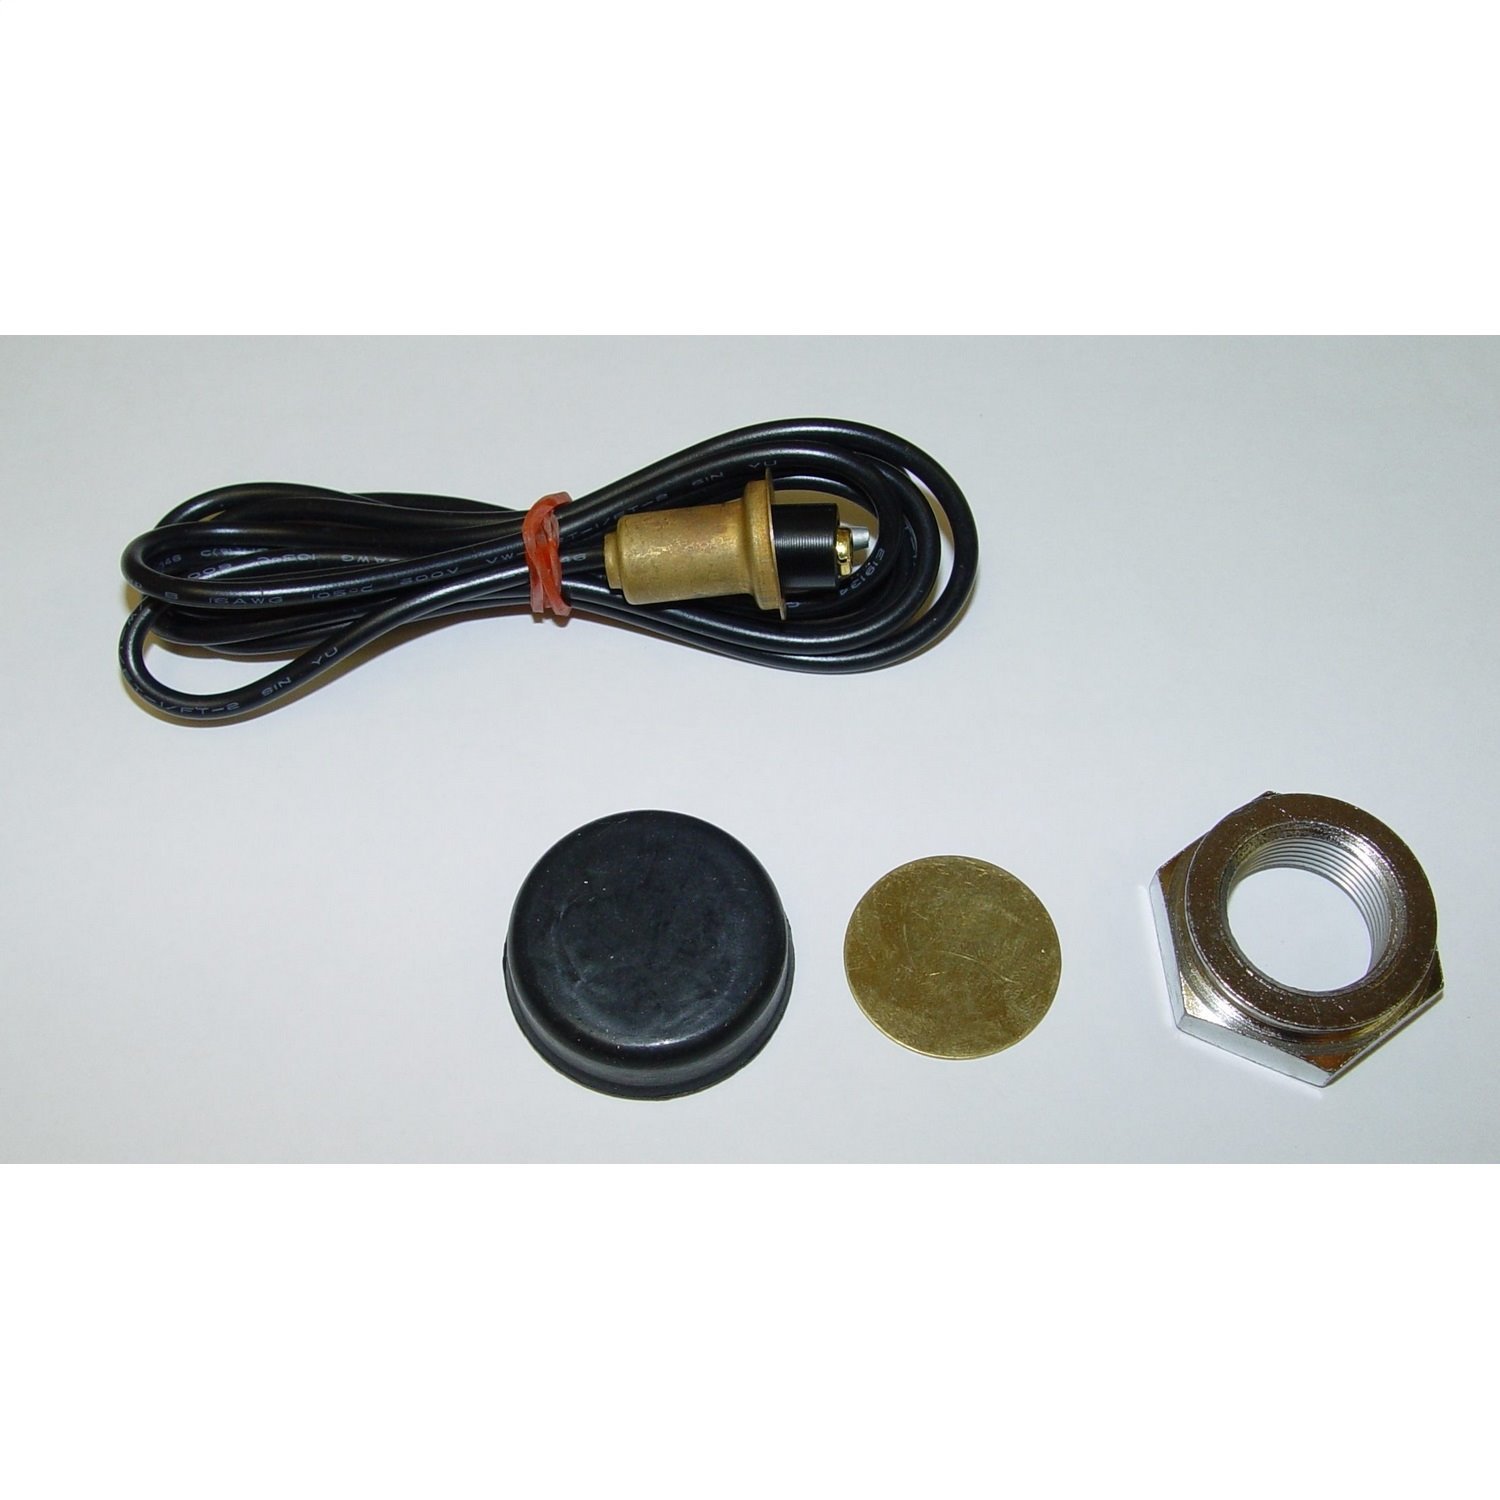 Replacement horn button kit from Omix-ADA, Fits 46-71 Willys and Jeep CJ models